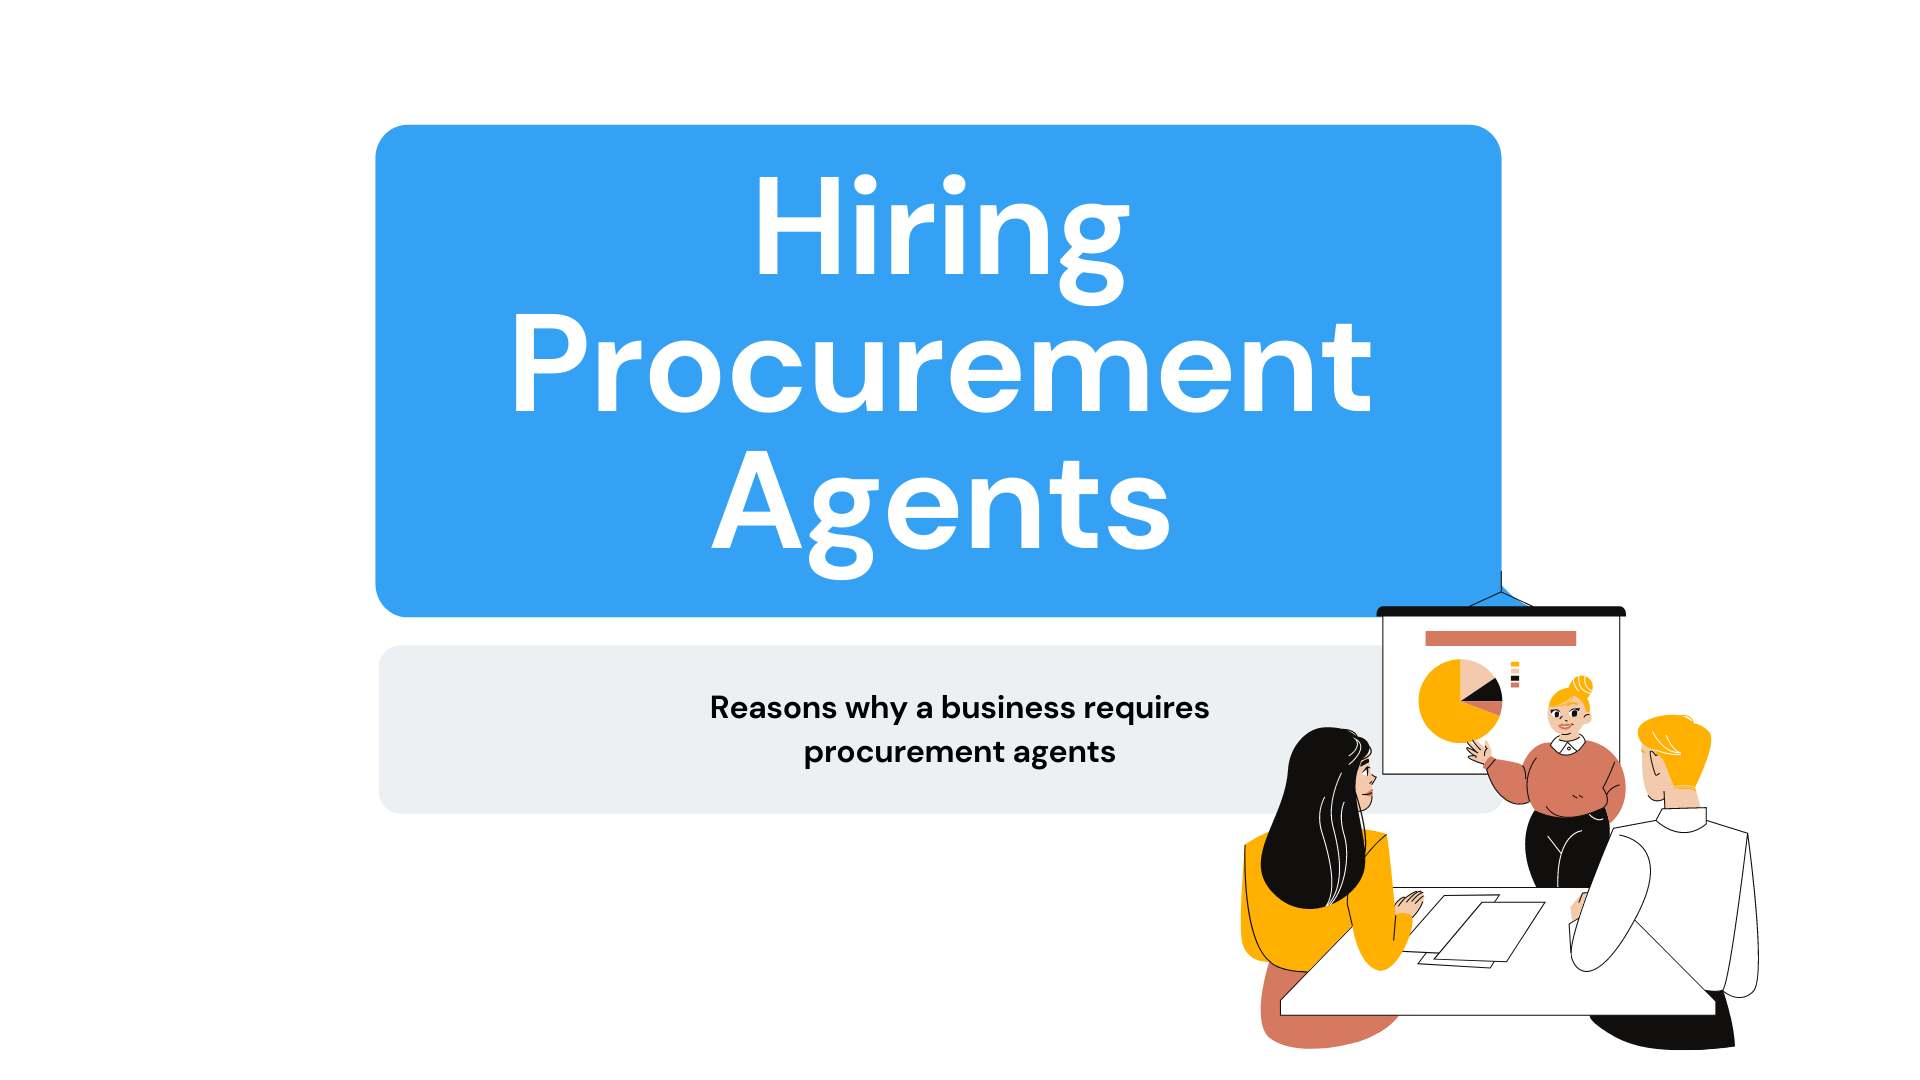 Reasons Why a Business Requires Procurement Agents